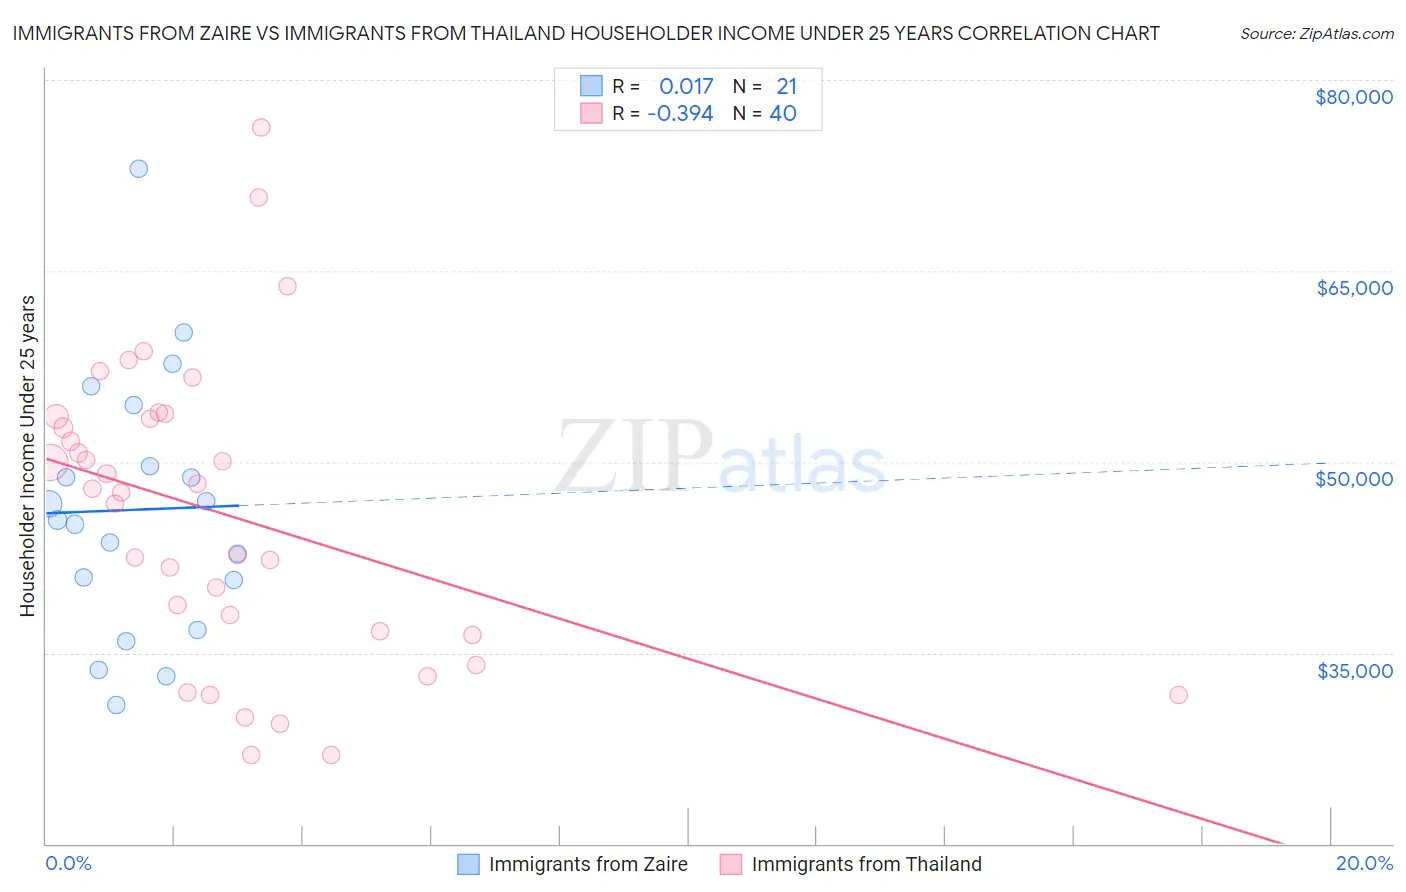 Immigrants from Zaire vs Immigrants from Thailand Householder Income Under 25 years